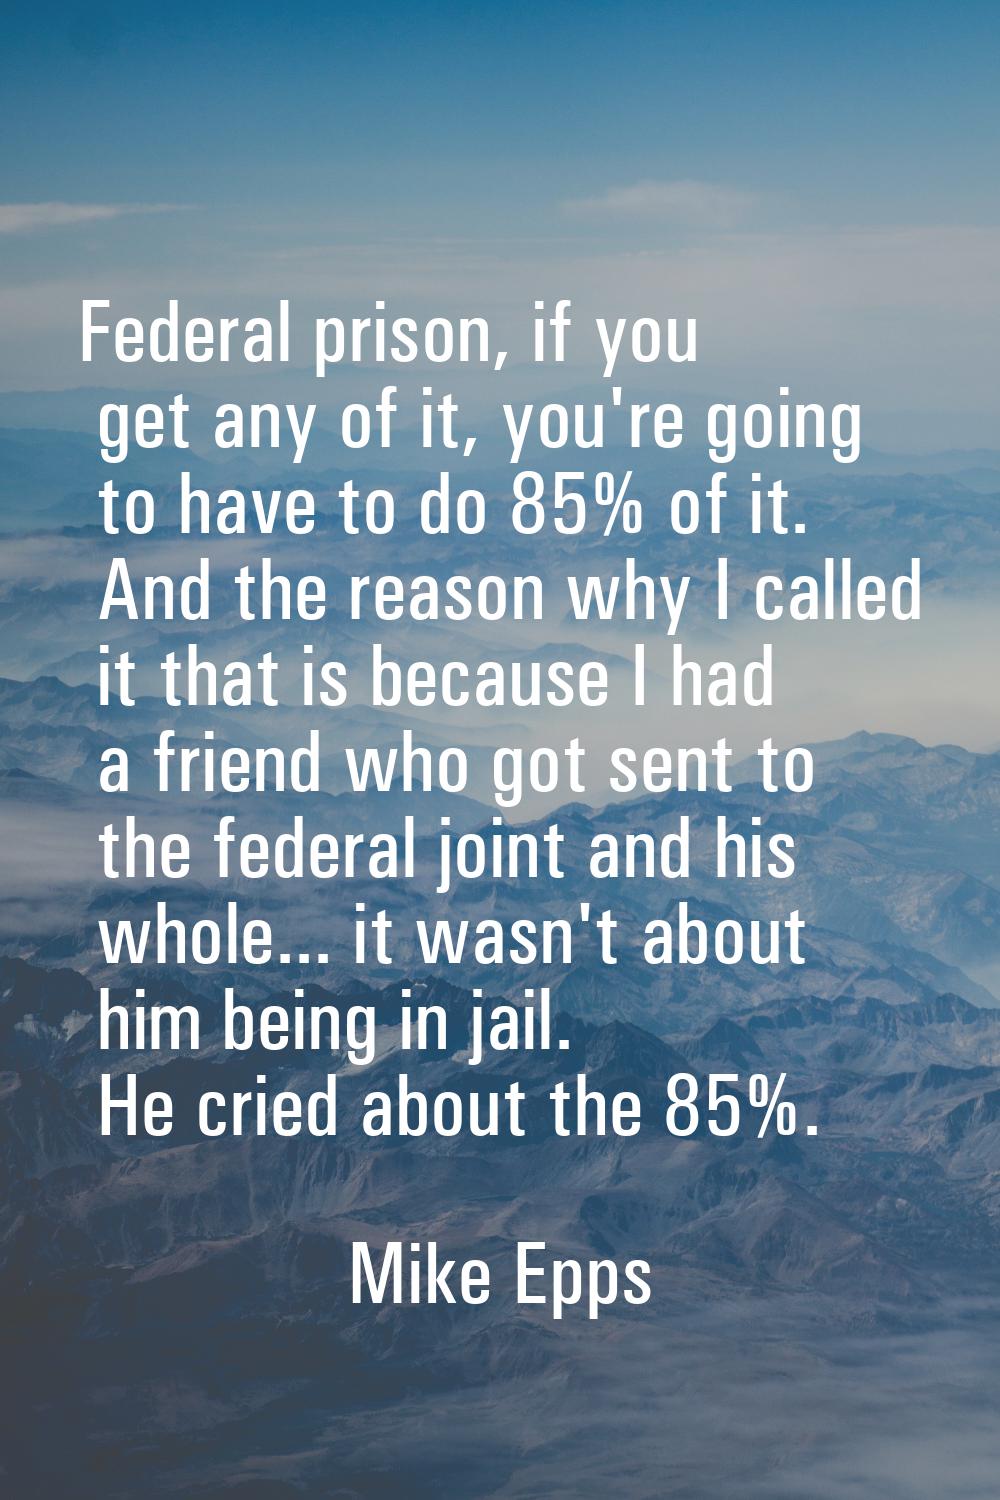 Federal prison, if you get any of it, you're going to have to do 85% of it. And the reason why I ca